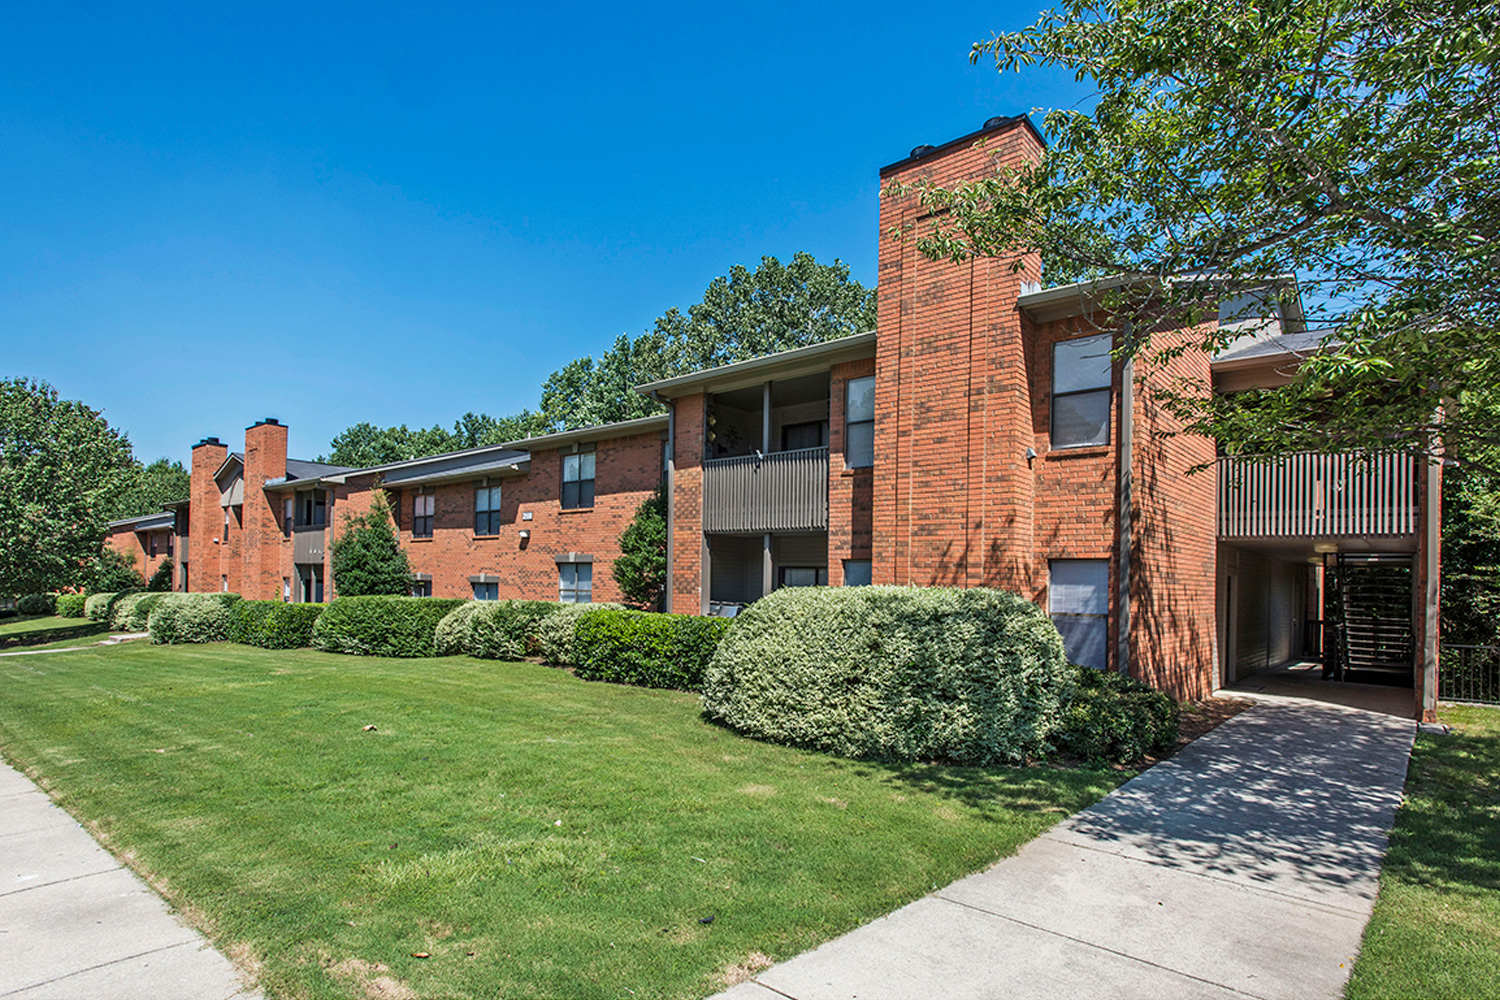 Balfour Beatty Communities Acquires Multifamily Property in Southern Birmingham